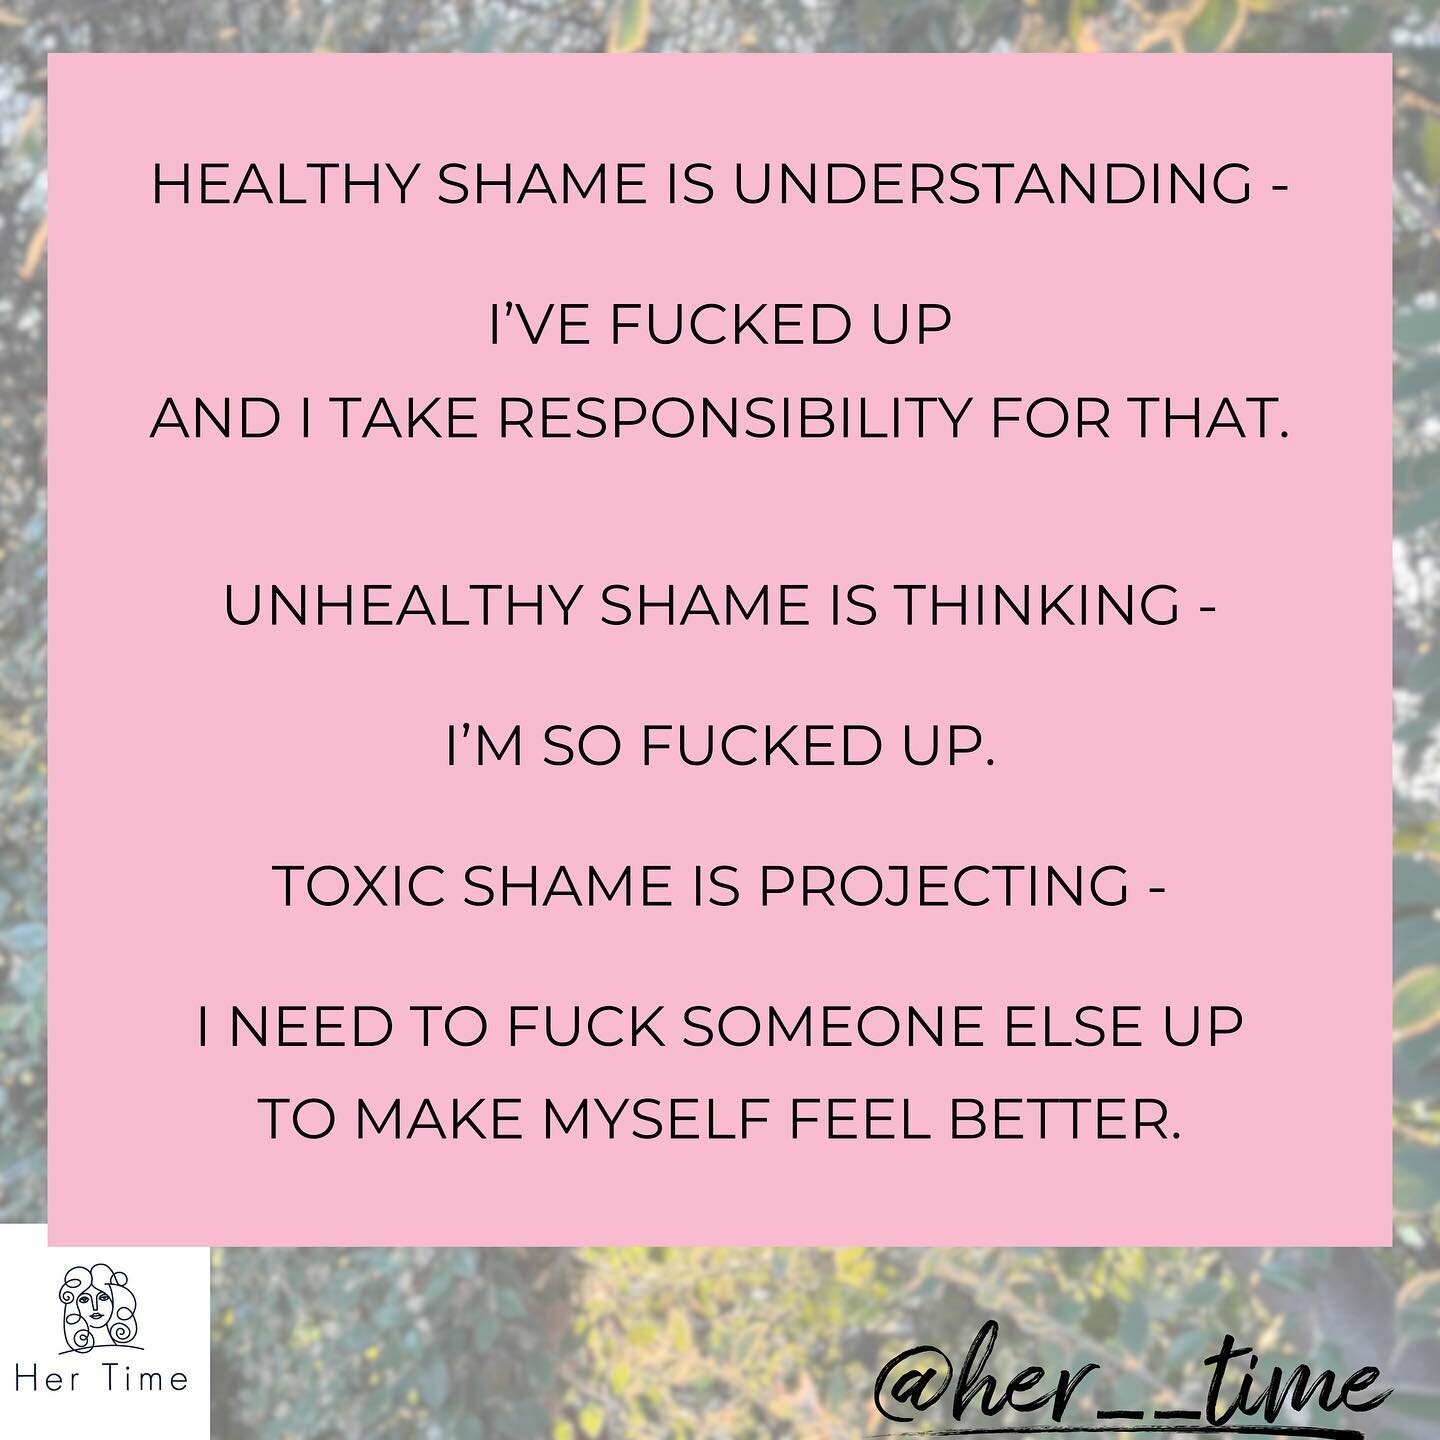 Healthy shame teaches us when we&rsquo;ve fucked up, hurt someone or something. 

It helps to deepen empathy for the good of the whole of community. 

Unhealthy or toxic shame is used as a weapon of patriarchal and capitalist power &amp; control. 

I